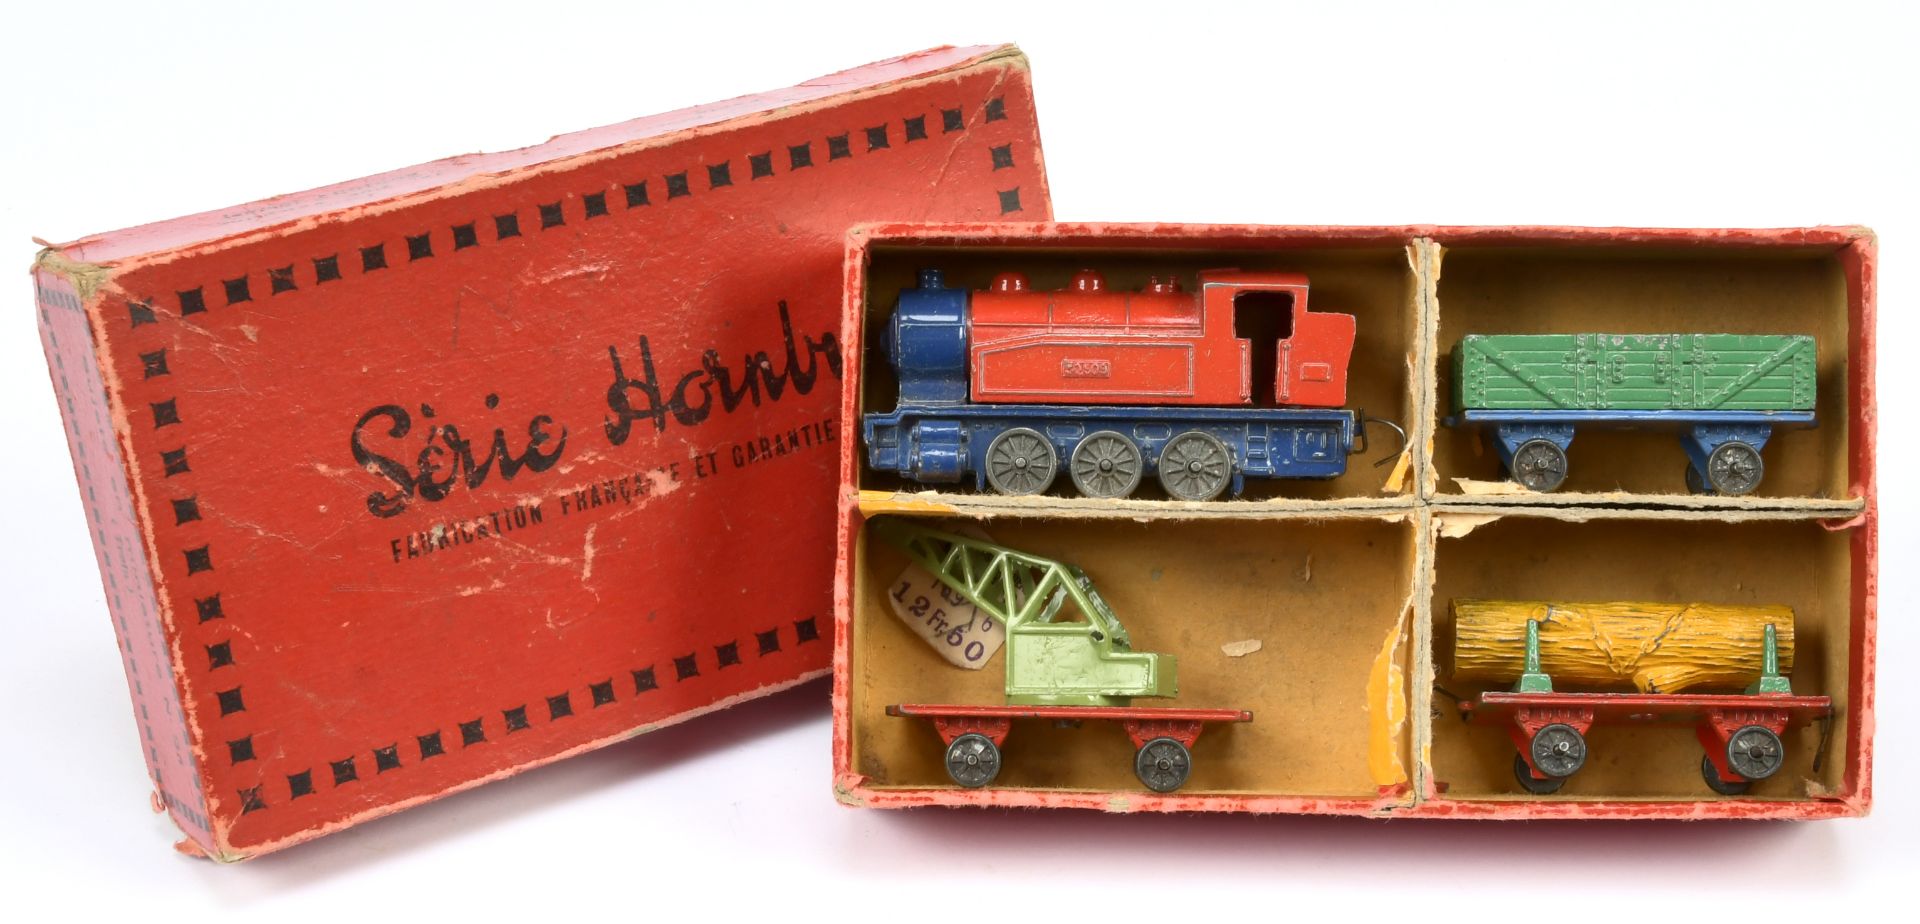 French Hornby Series (Dinky) Train Set  - containing Locomotive - Red and Blue,Log Trailer - Red,...